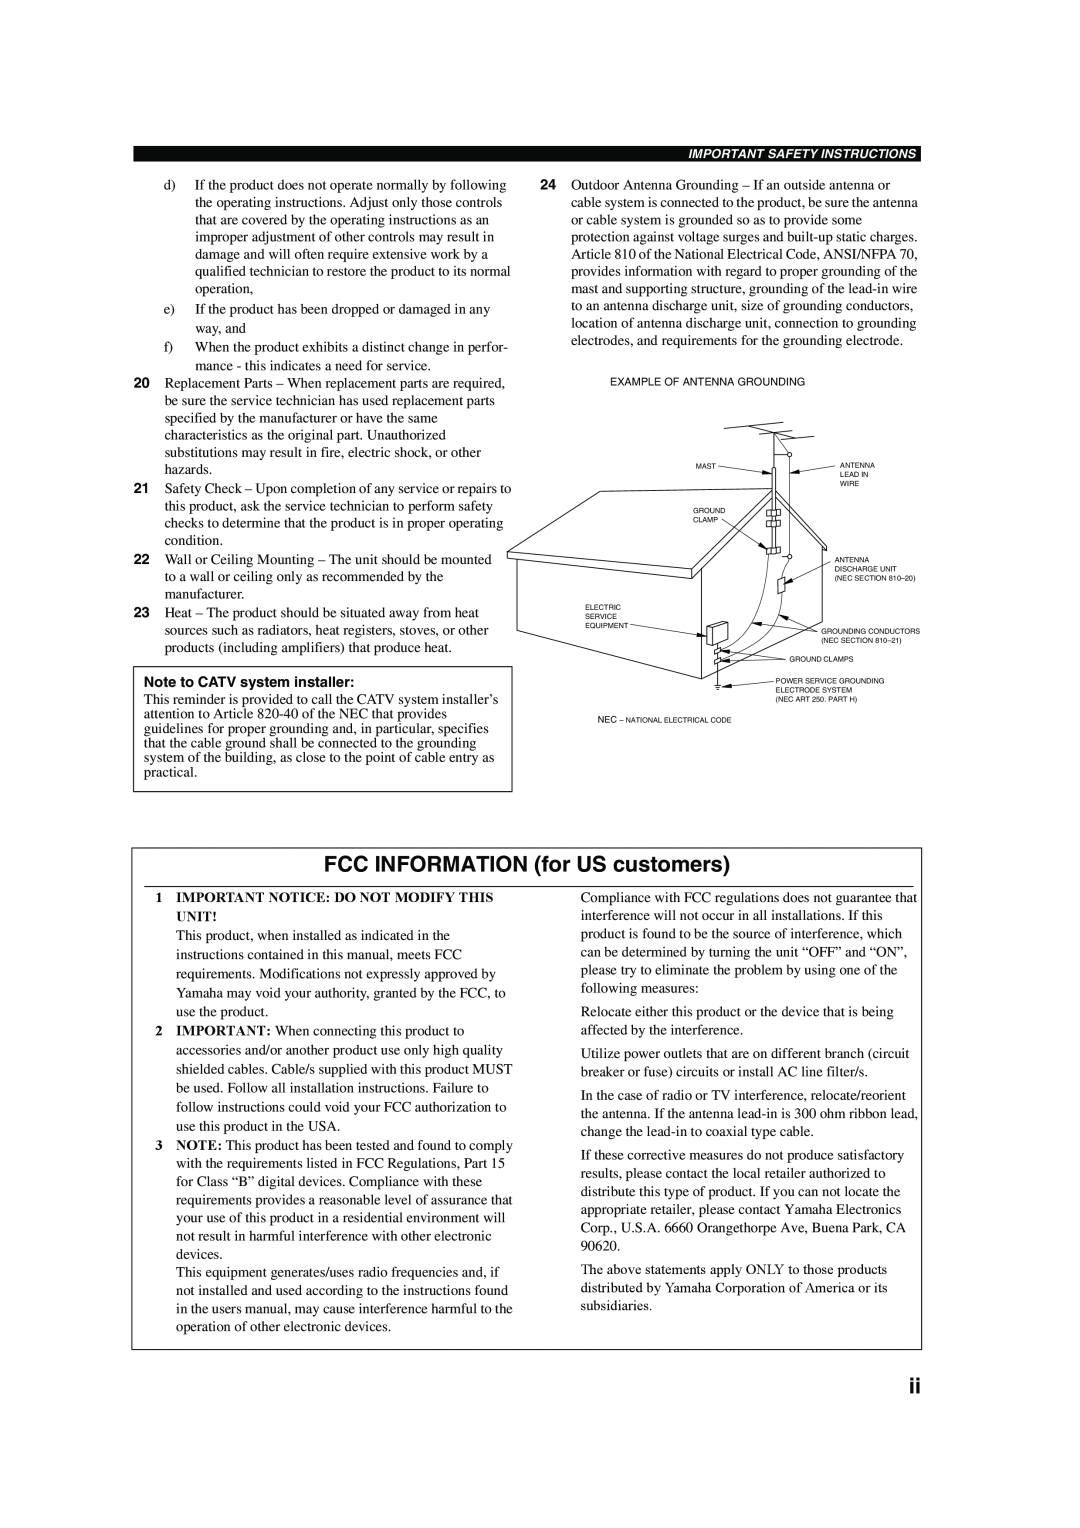 Yamaha HTR-5760 owner manual FCC INFORMATION for US customers, Note to CATV system installer 